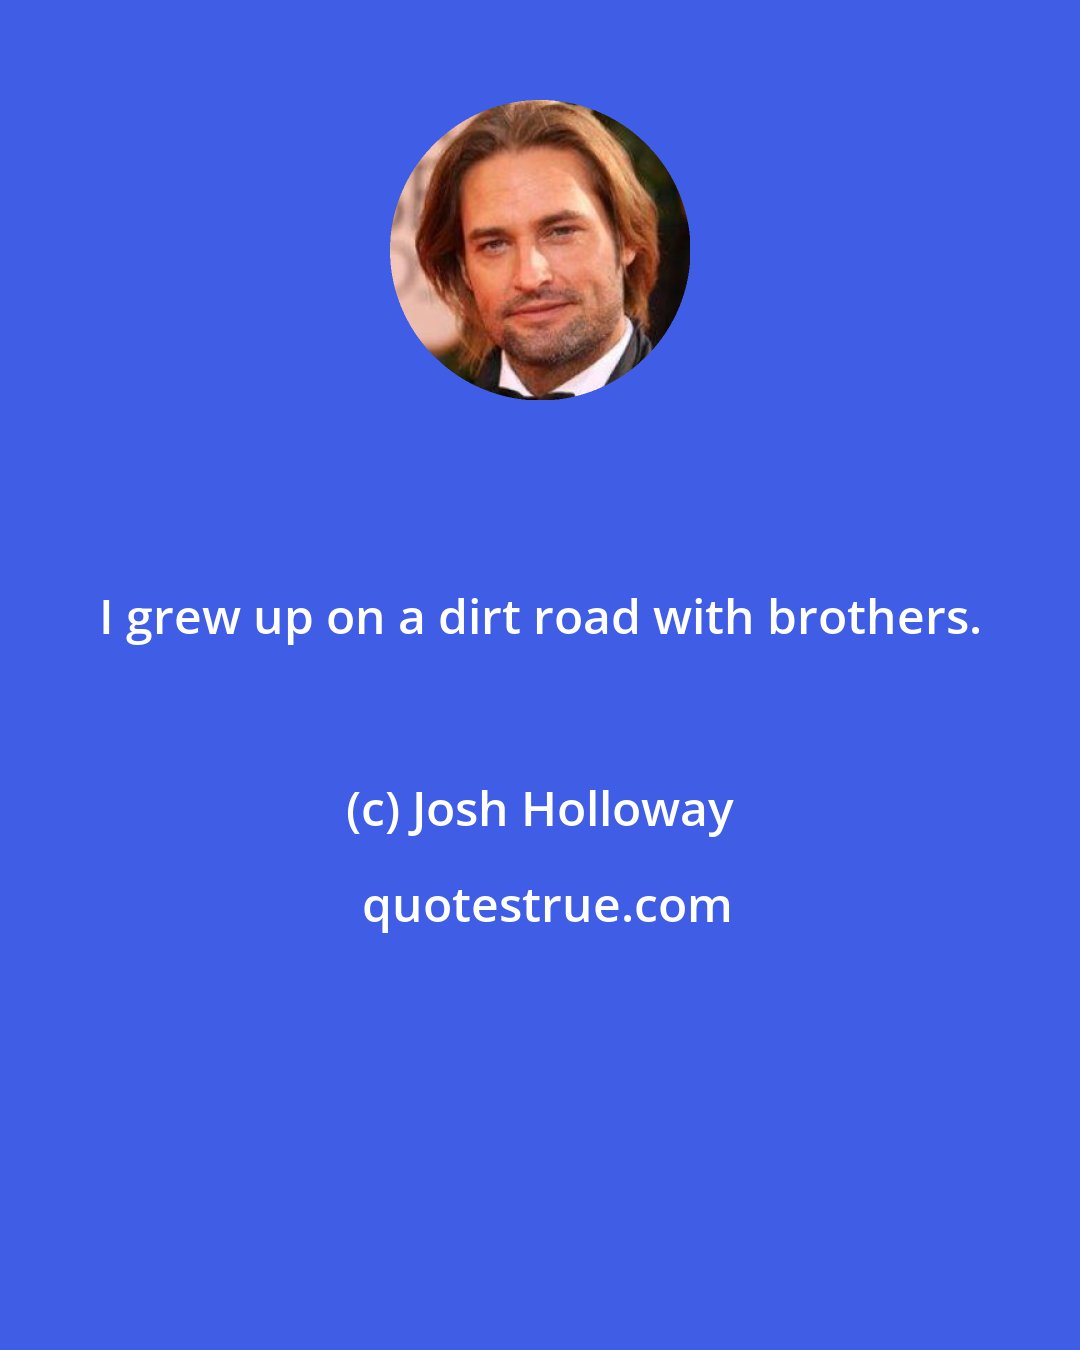 Josh Holloway: I grew up on a dirt road with brothers.